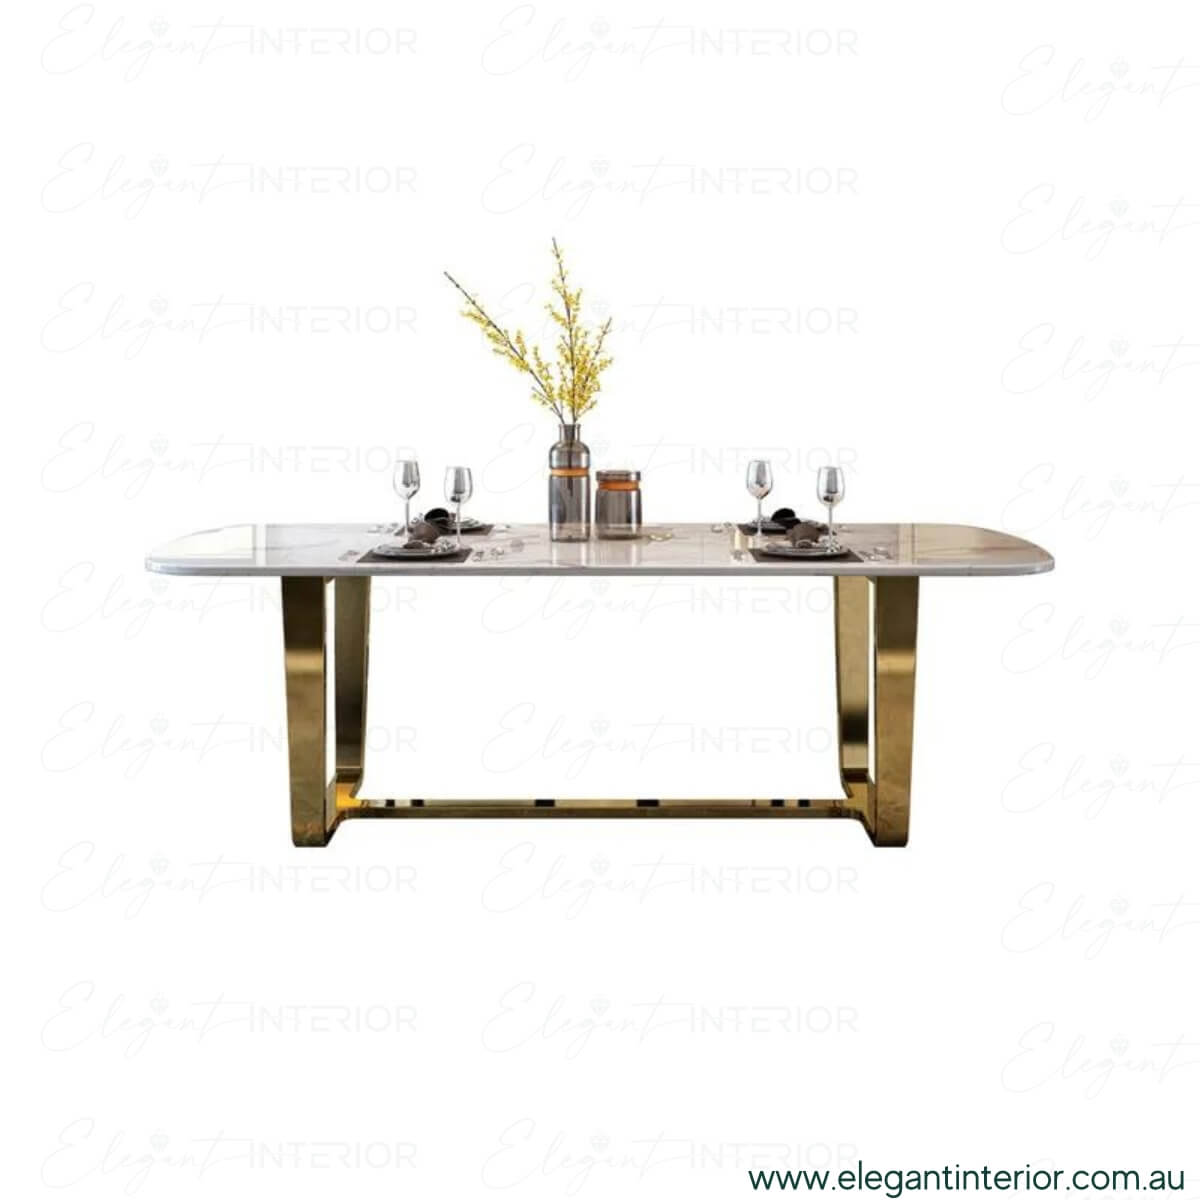 Marble-Top-Dining-Table-in-Australia-7